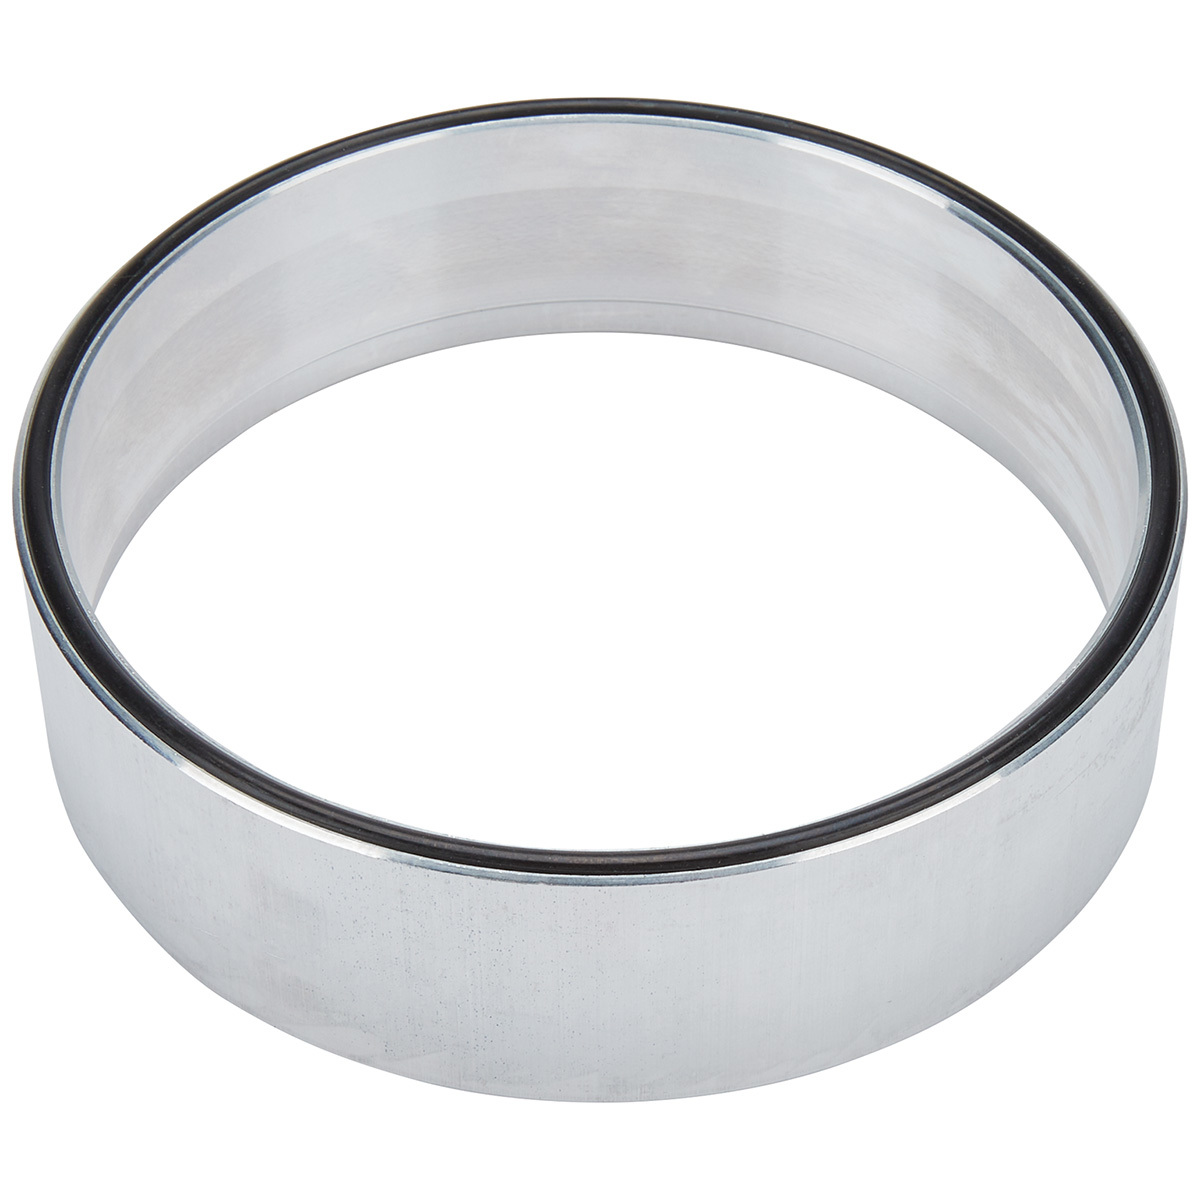 Allstar Performance 26087 Air Cleaner Spacer, 1-1/2 in Thick, 5-1/8 in Carb Flange, Aluminum, Natural, Each